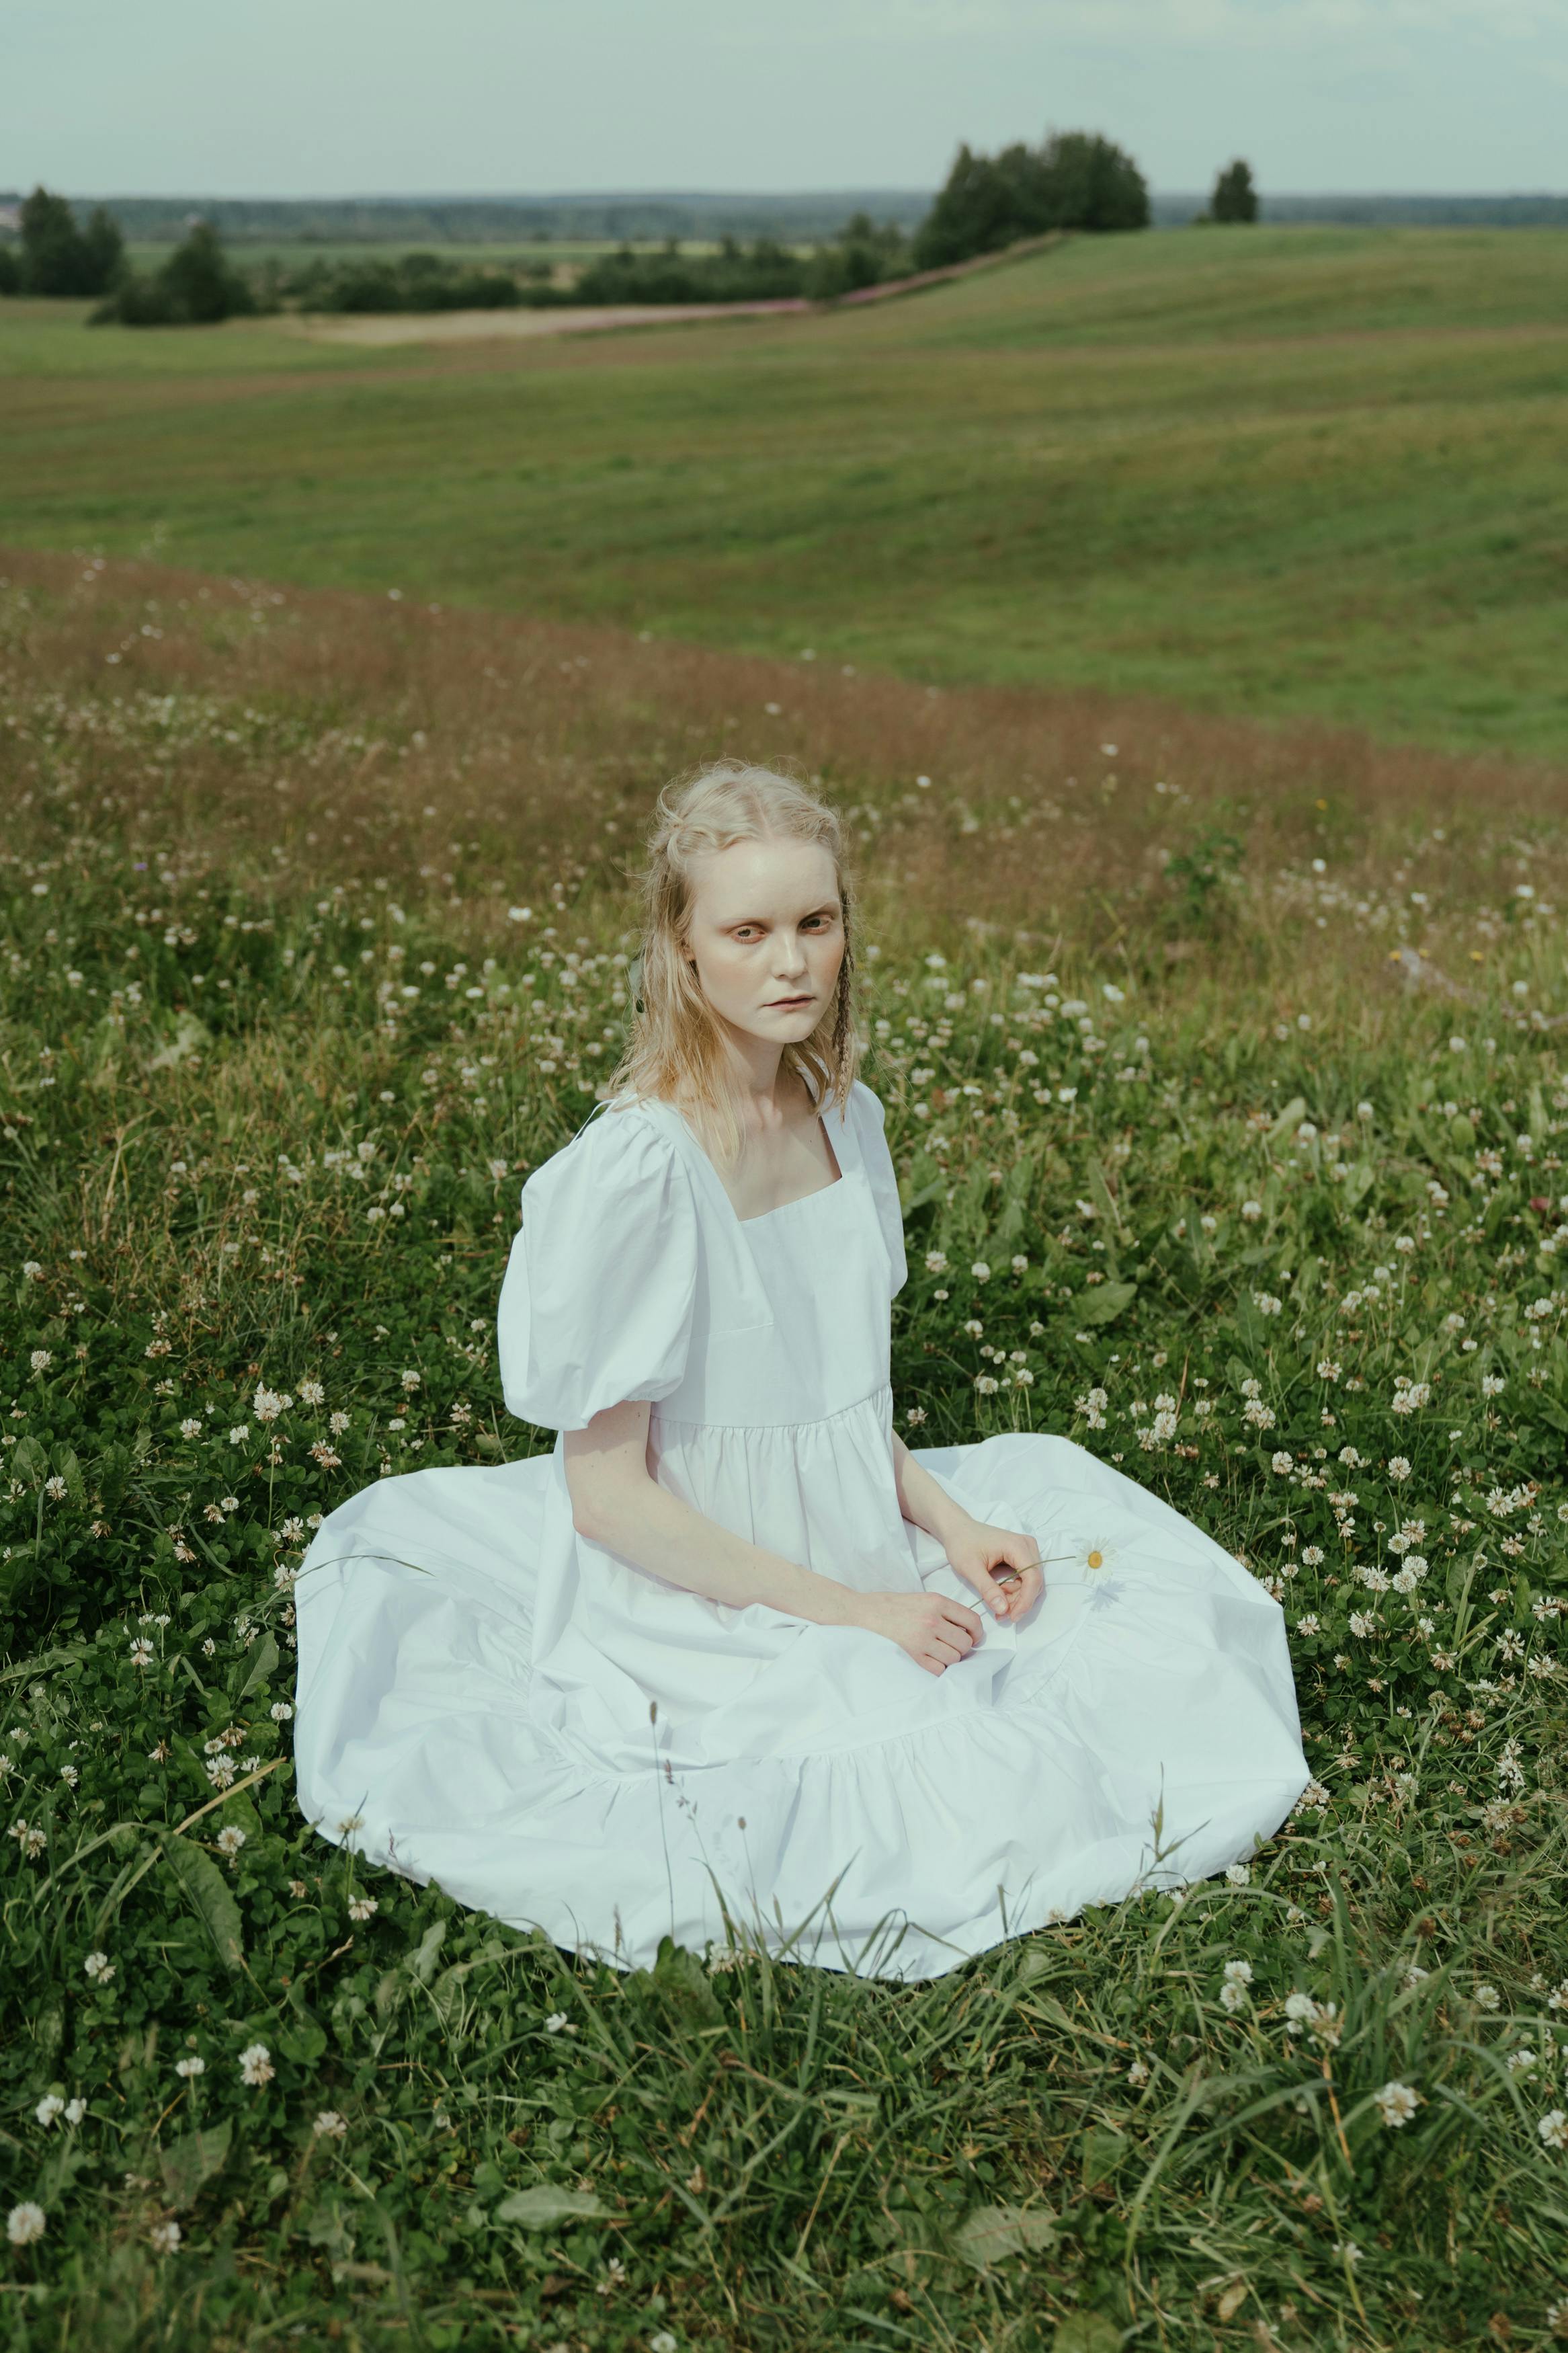 Girl in White Dress Sitting on Green Grass Field · Free Stock Photo